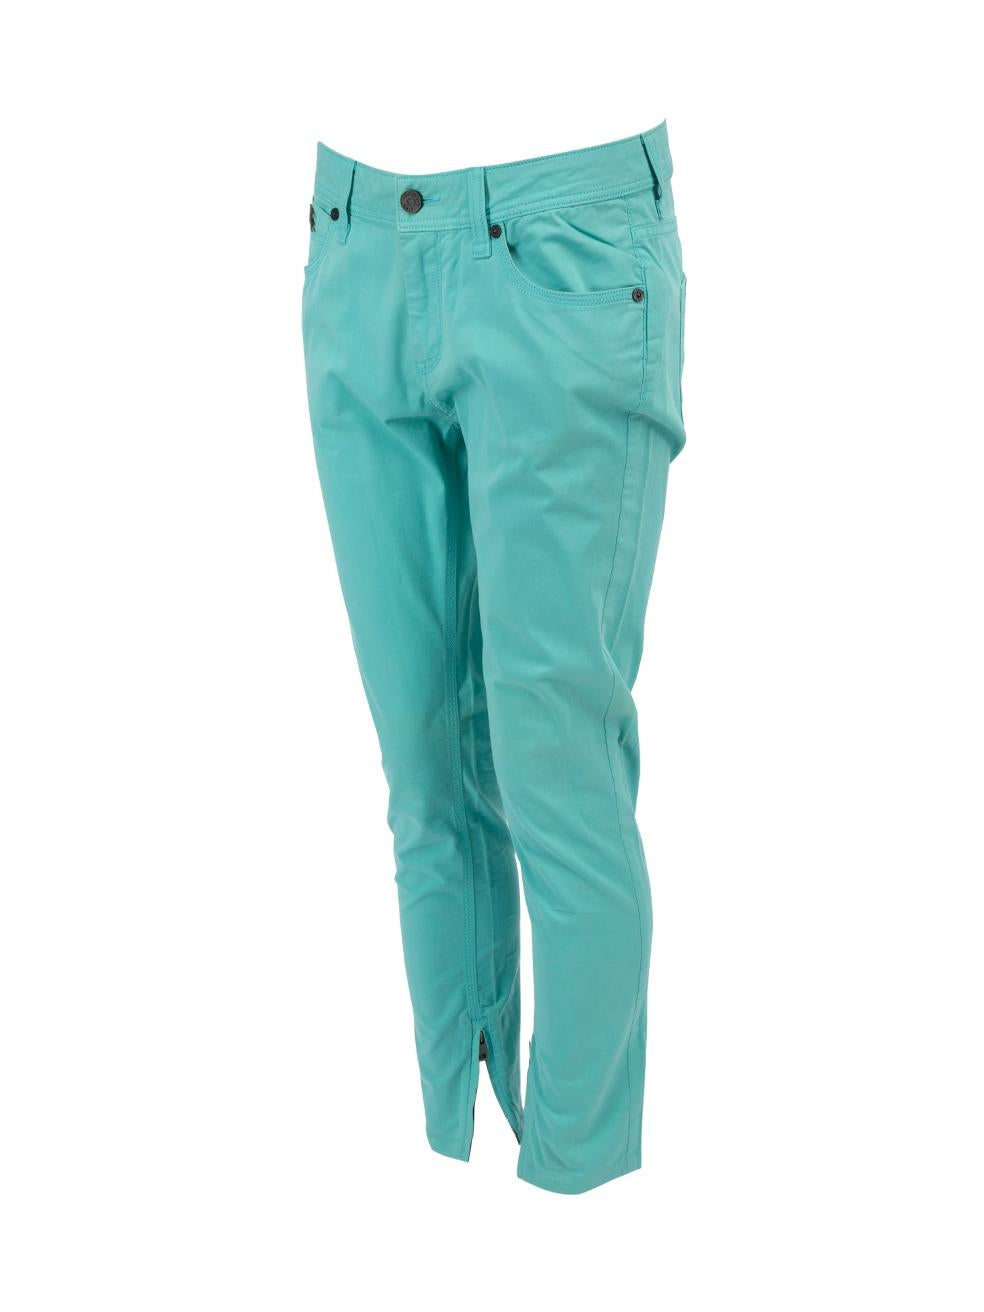 Women's Burberry Brit Turquoise Bayswater Skinny Ankle Zip Trousers Size M